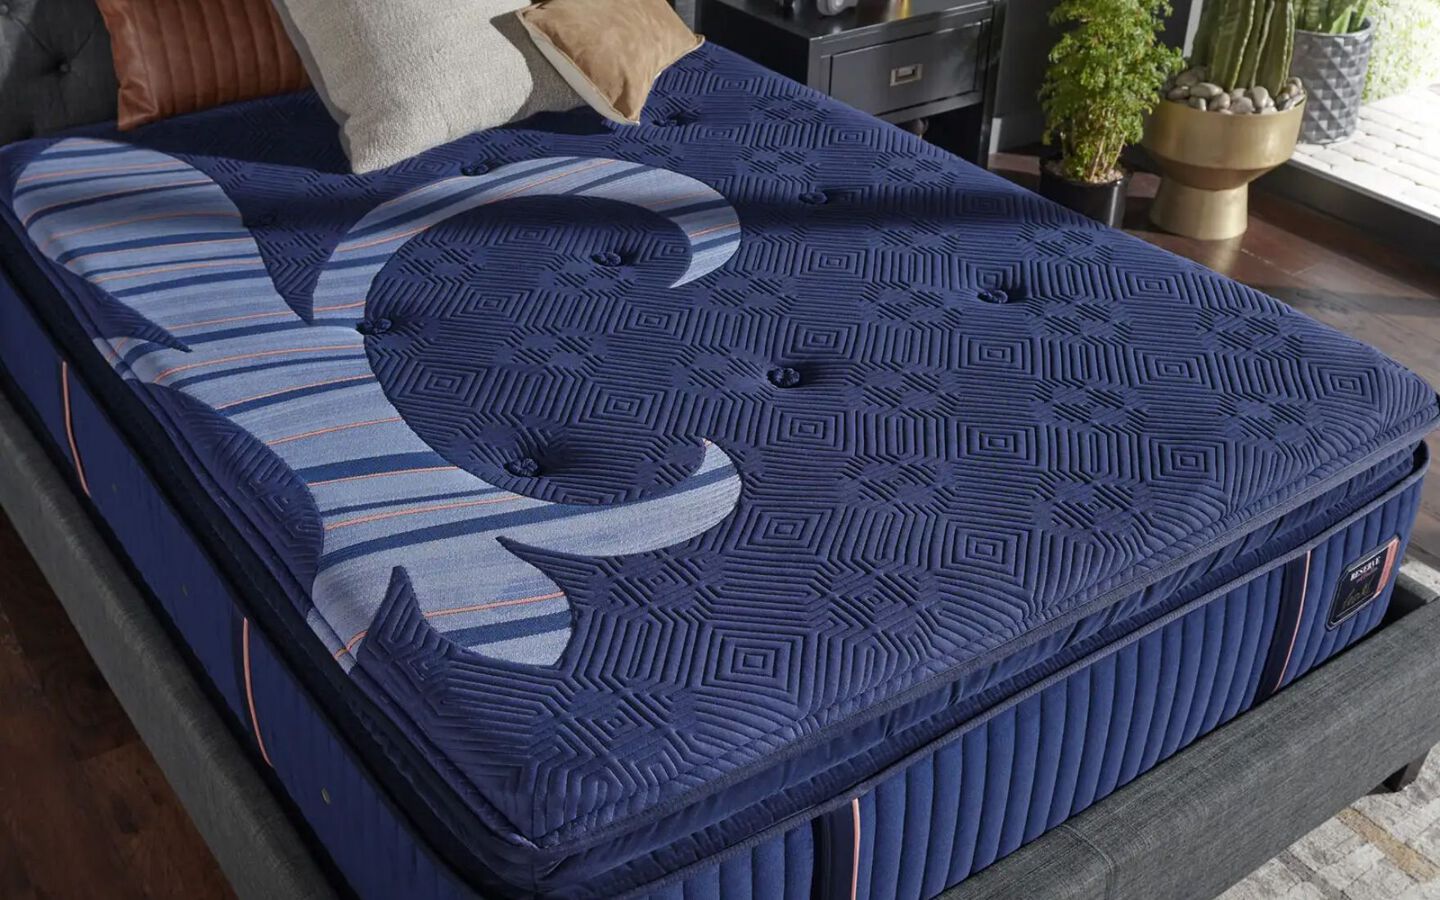 Aerial view of a Stearns & Foster navy blue mattress on a grey bedframe